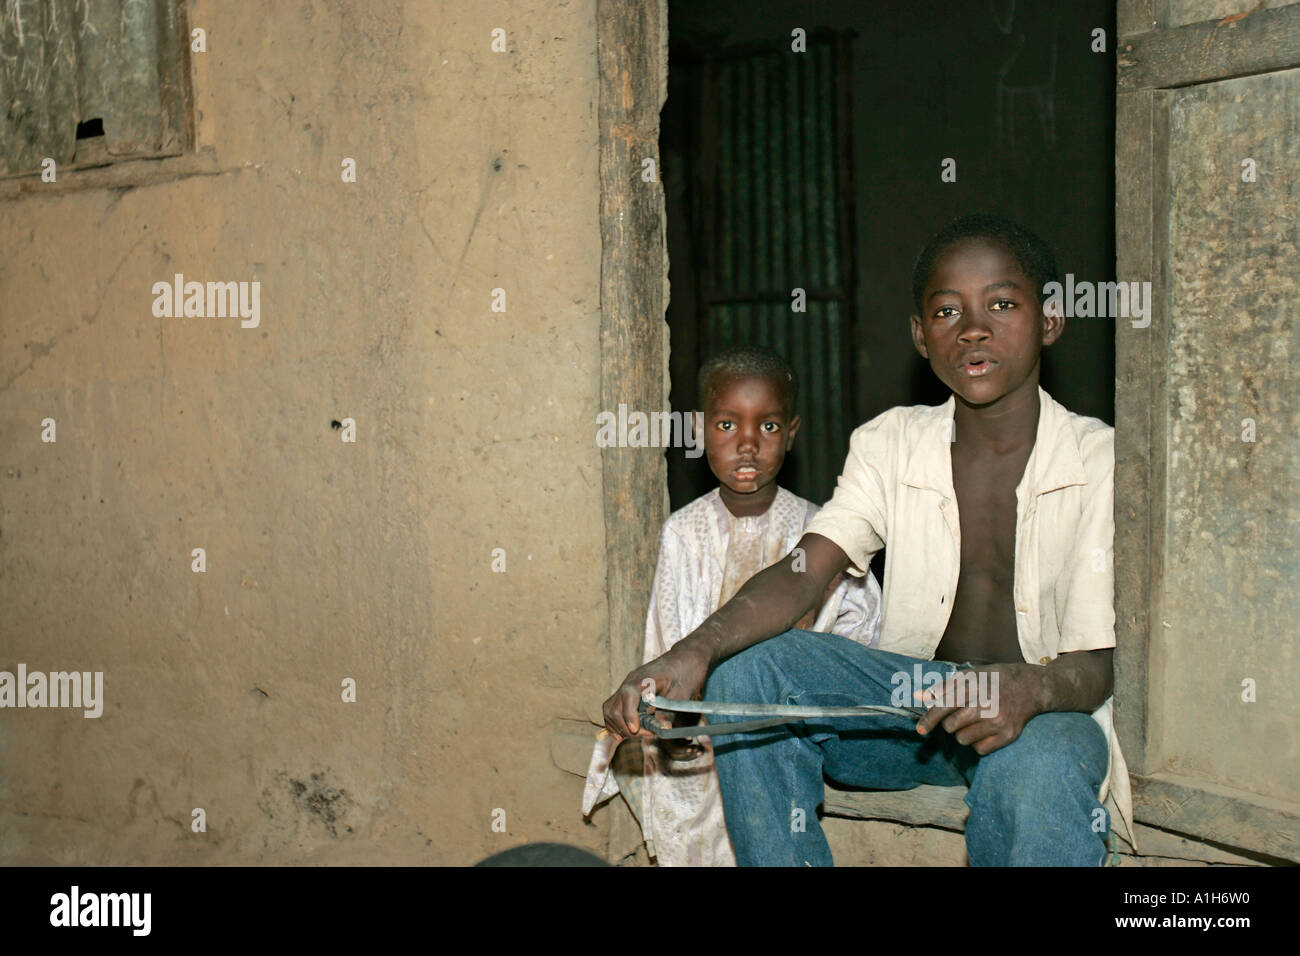 Boy in doorway with catapult Berending village south of The Gambia Stock Photo